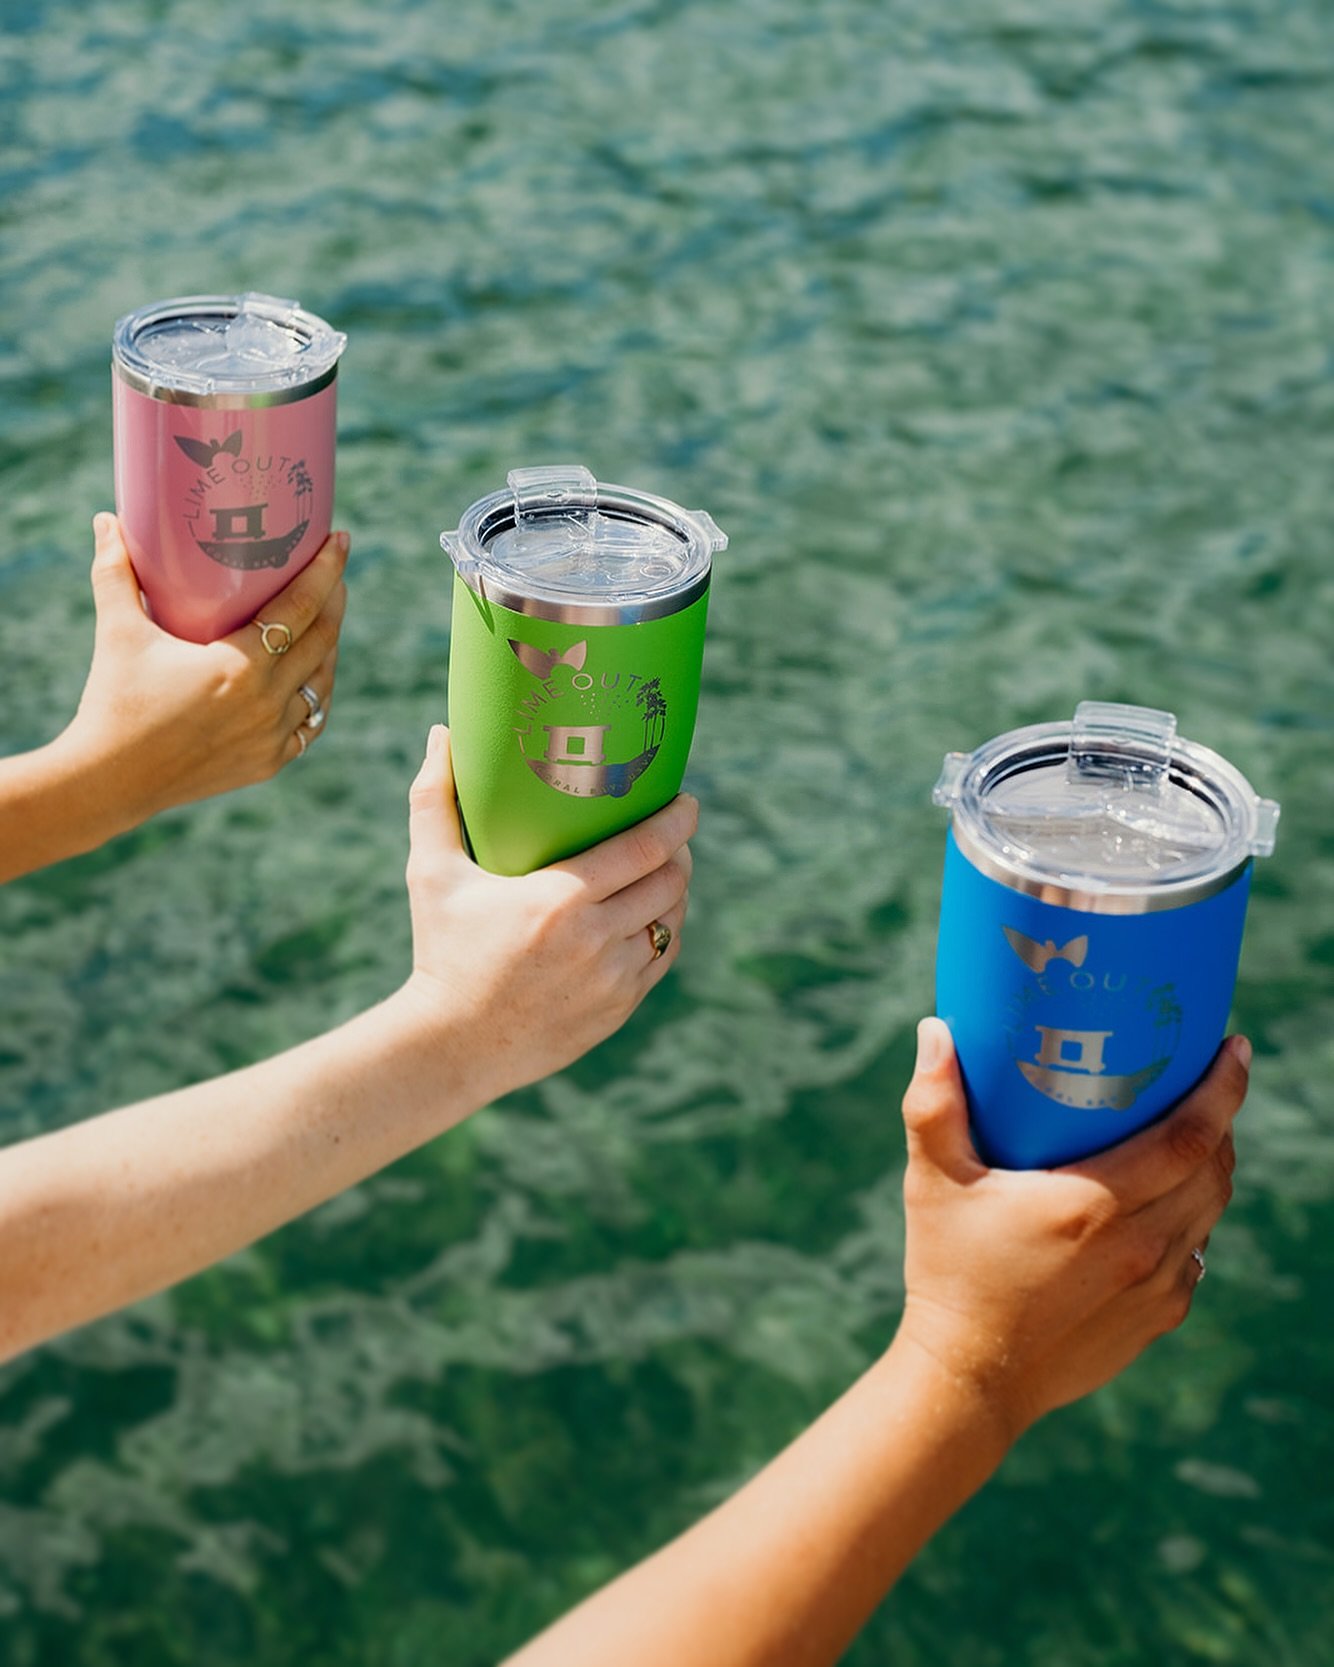 If you know us, you know we LOVE a good reusable cup! We chose @orcacoolers because all their coolers are made in the USA and the drink ware is powder coated, decorated, customized, assembled, and packaged in the USA. Shop this design and more today 